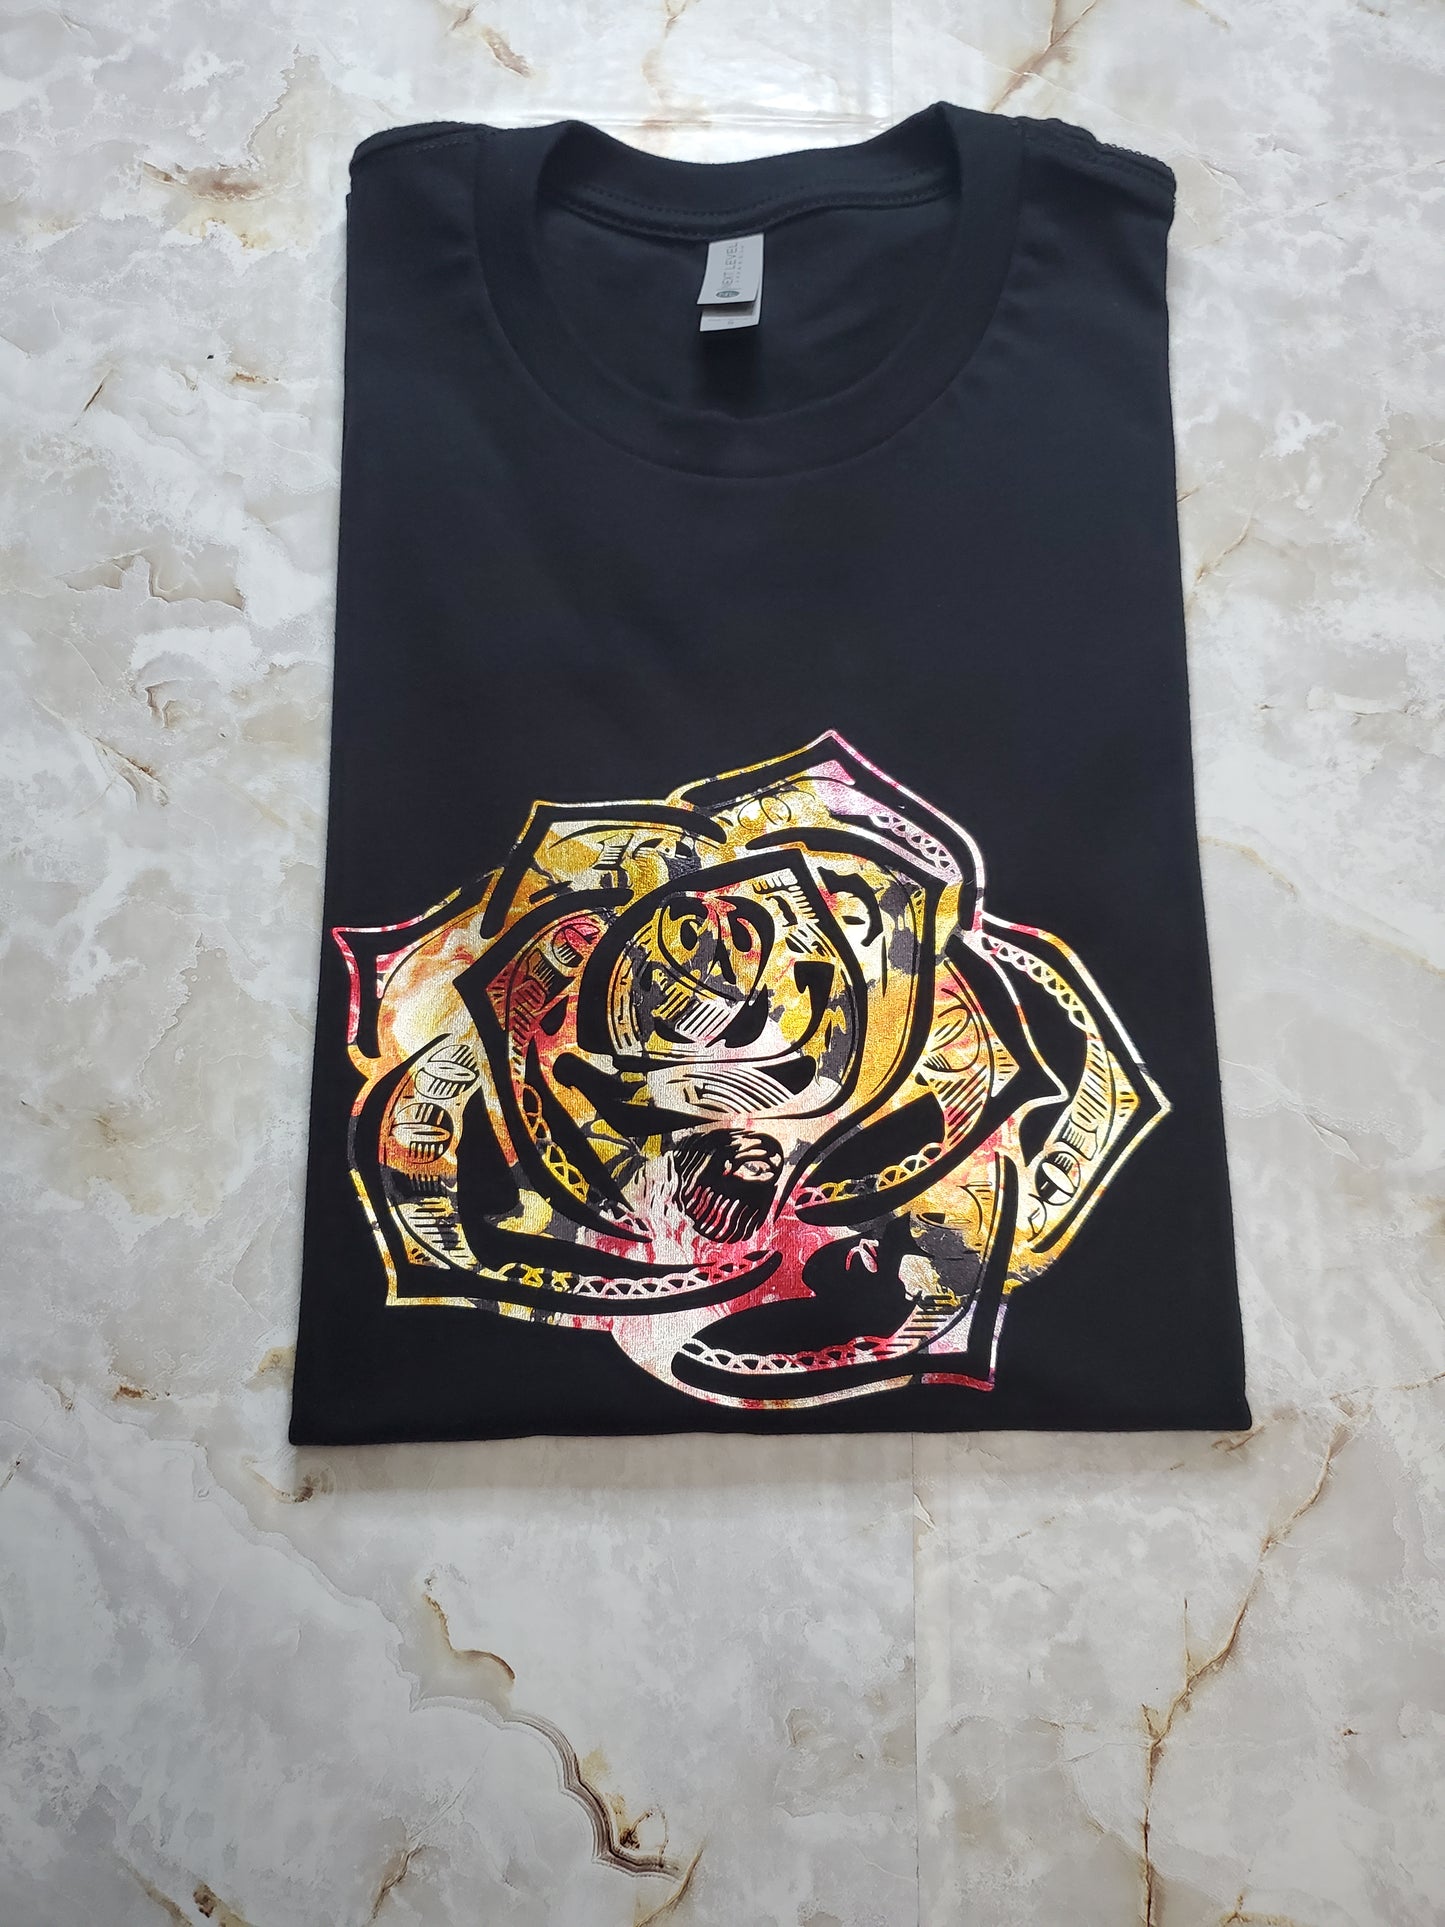 $100 Rose T-Shirt - Centre Ave Clothing Co.